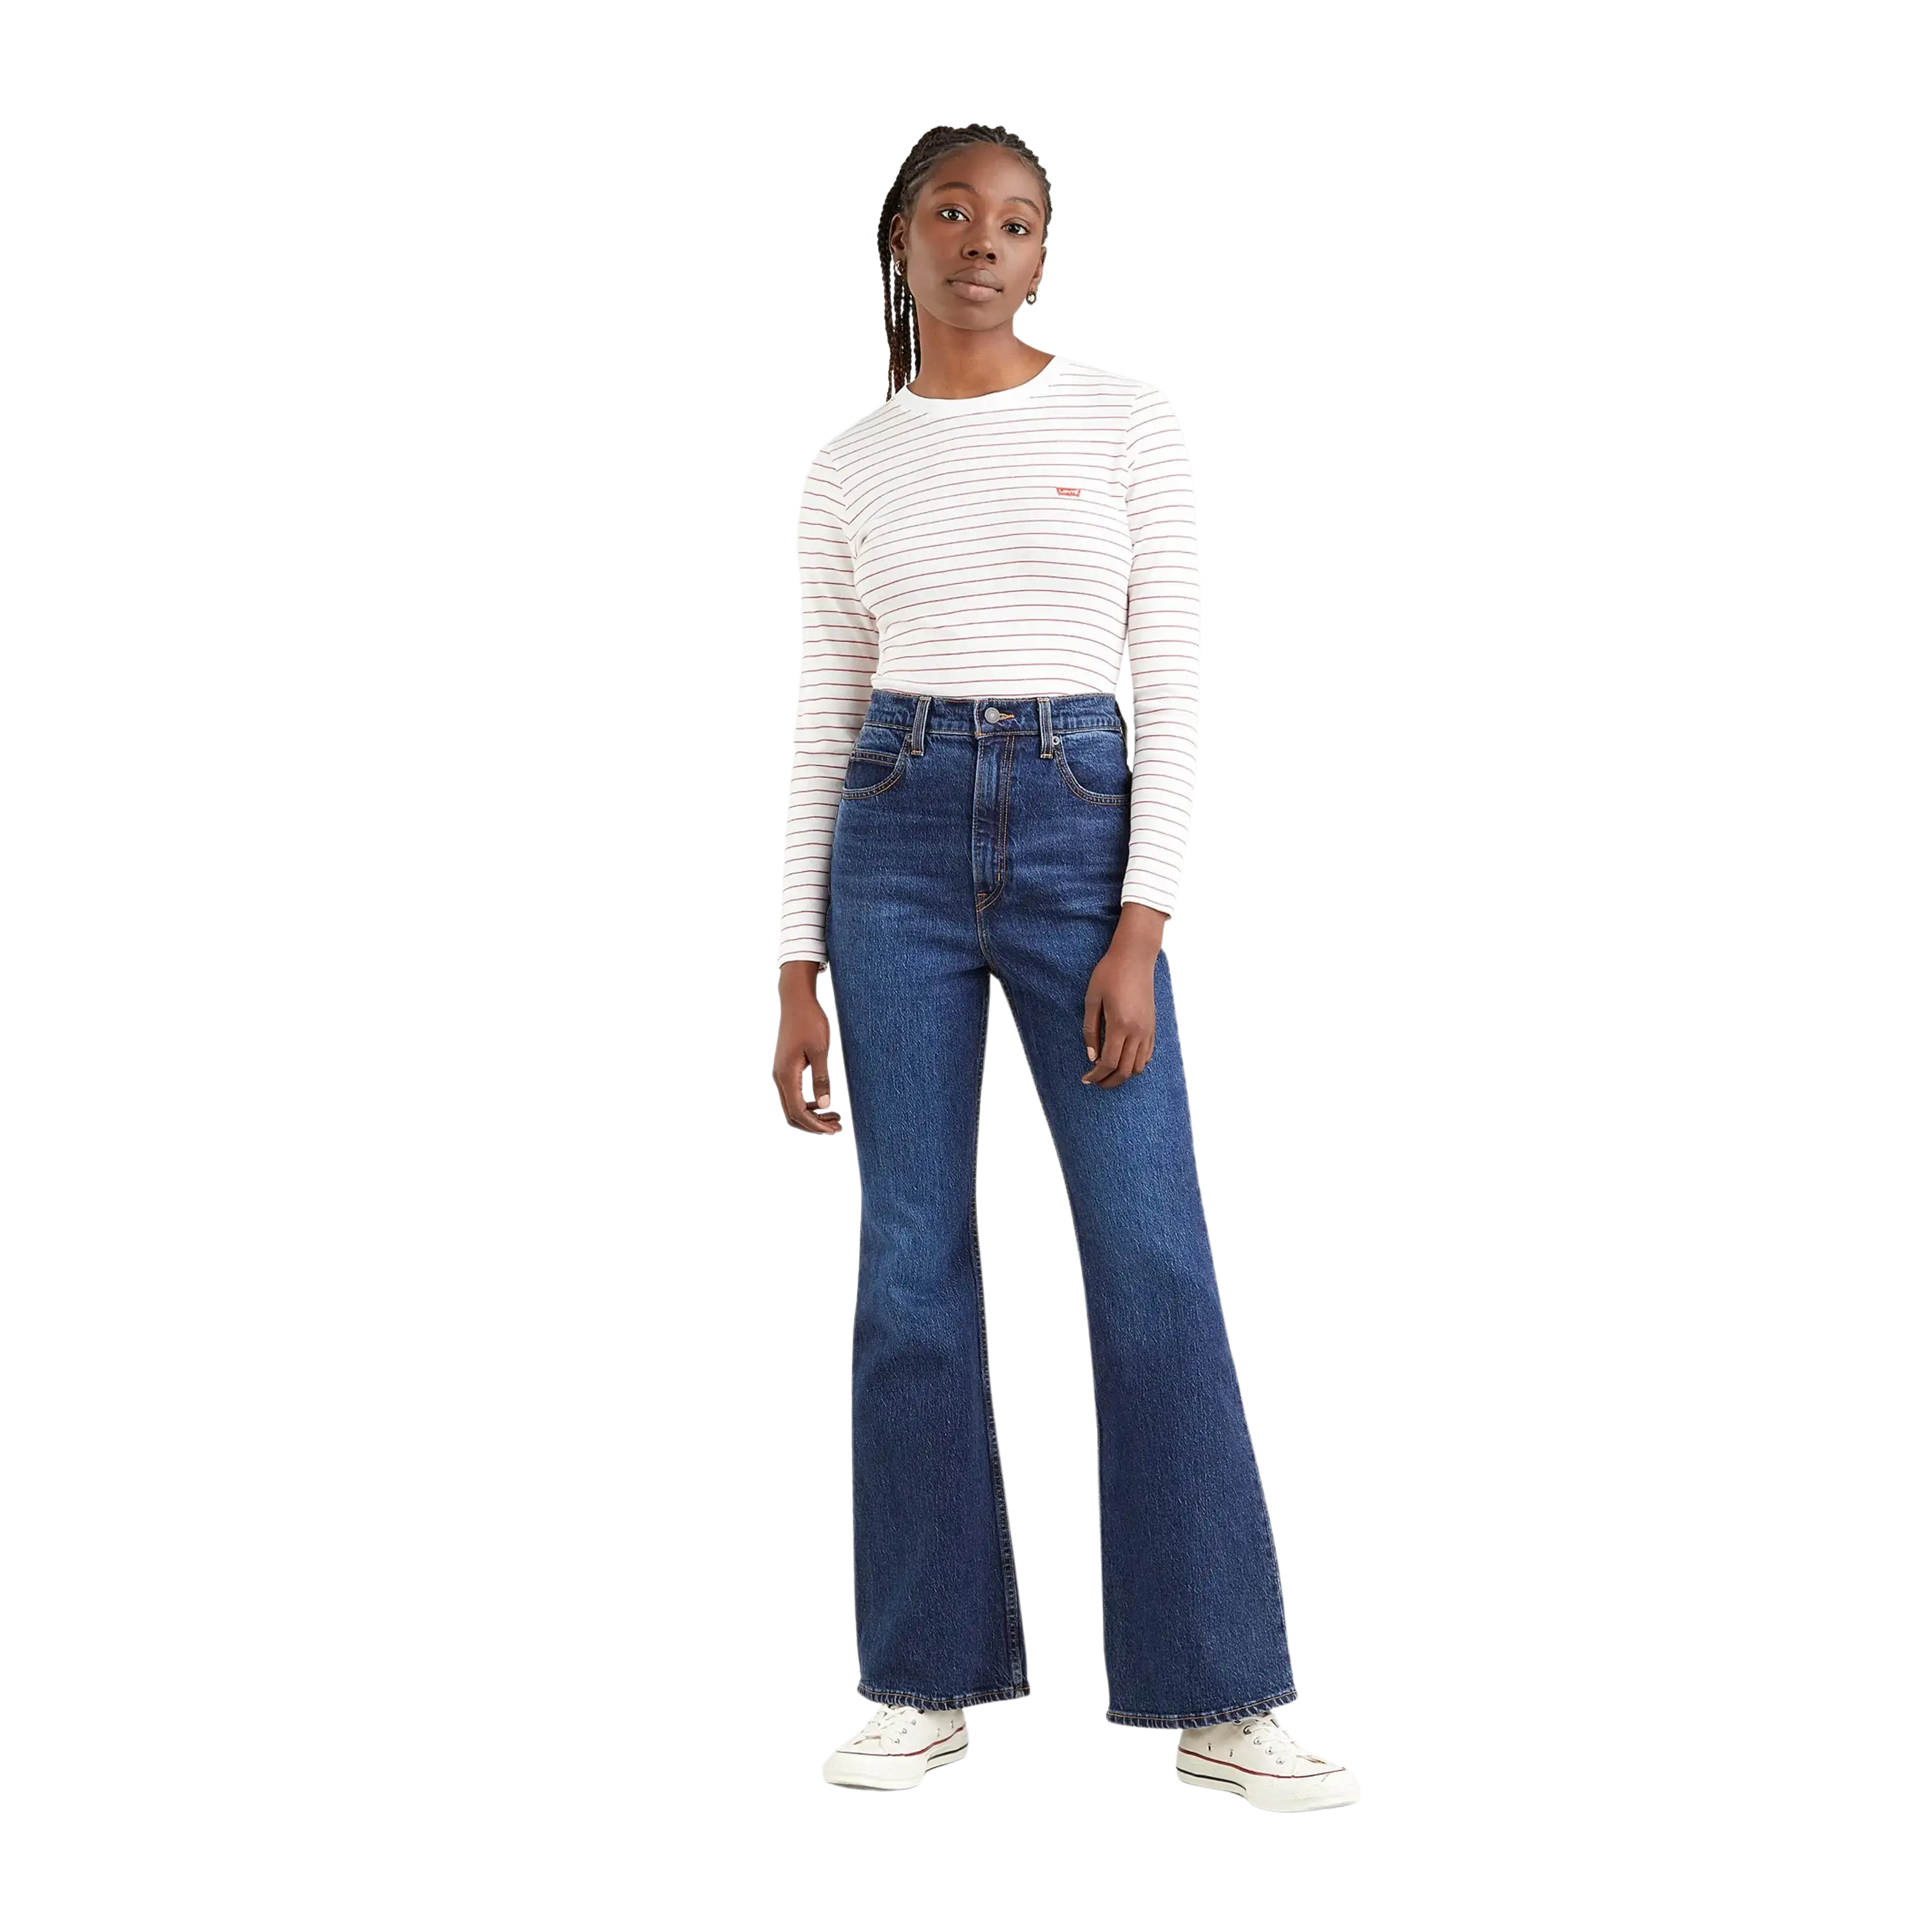 Buy Levi's 70's High Flare Jeans from £50.00 (Today) – Best Deals on